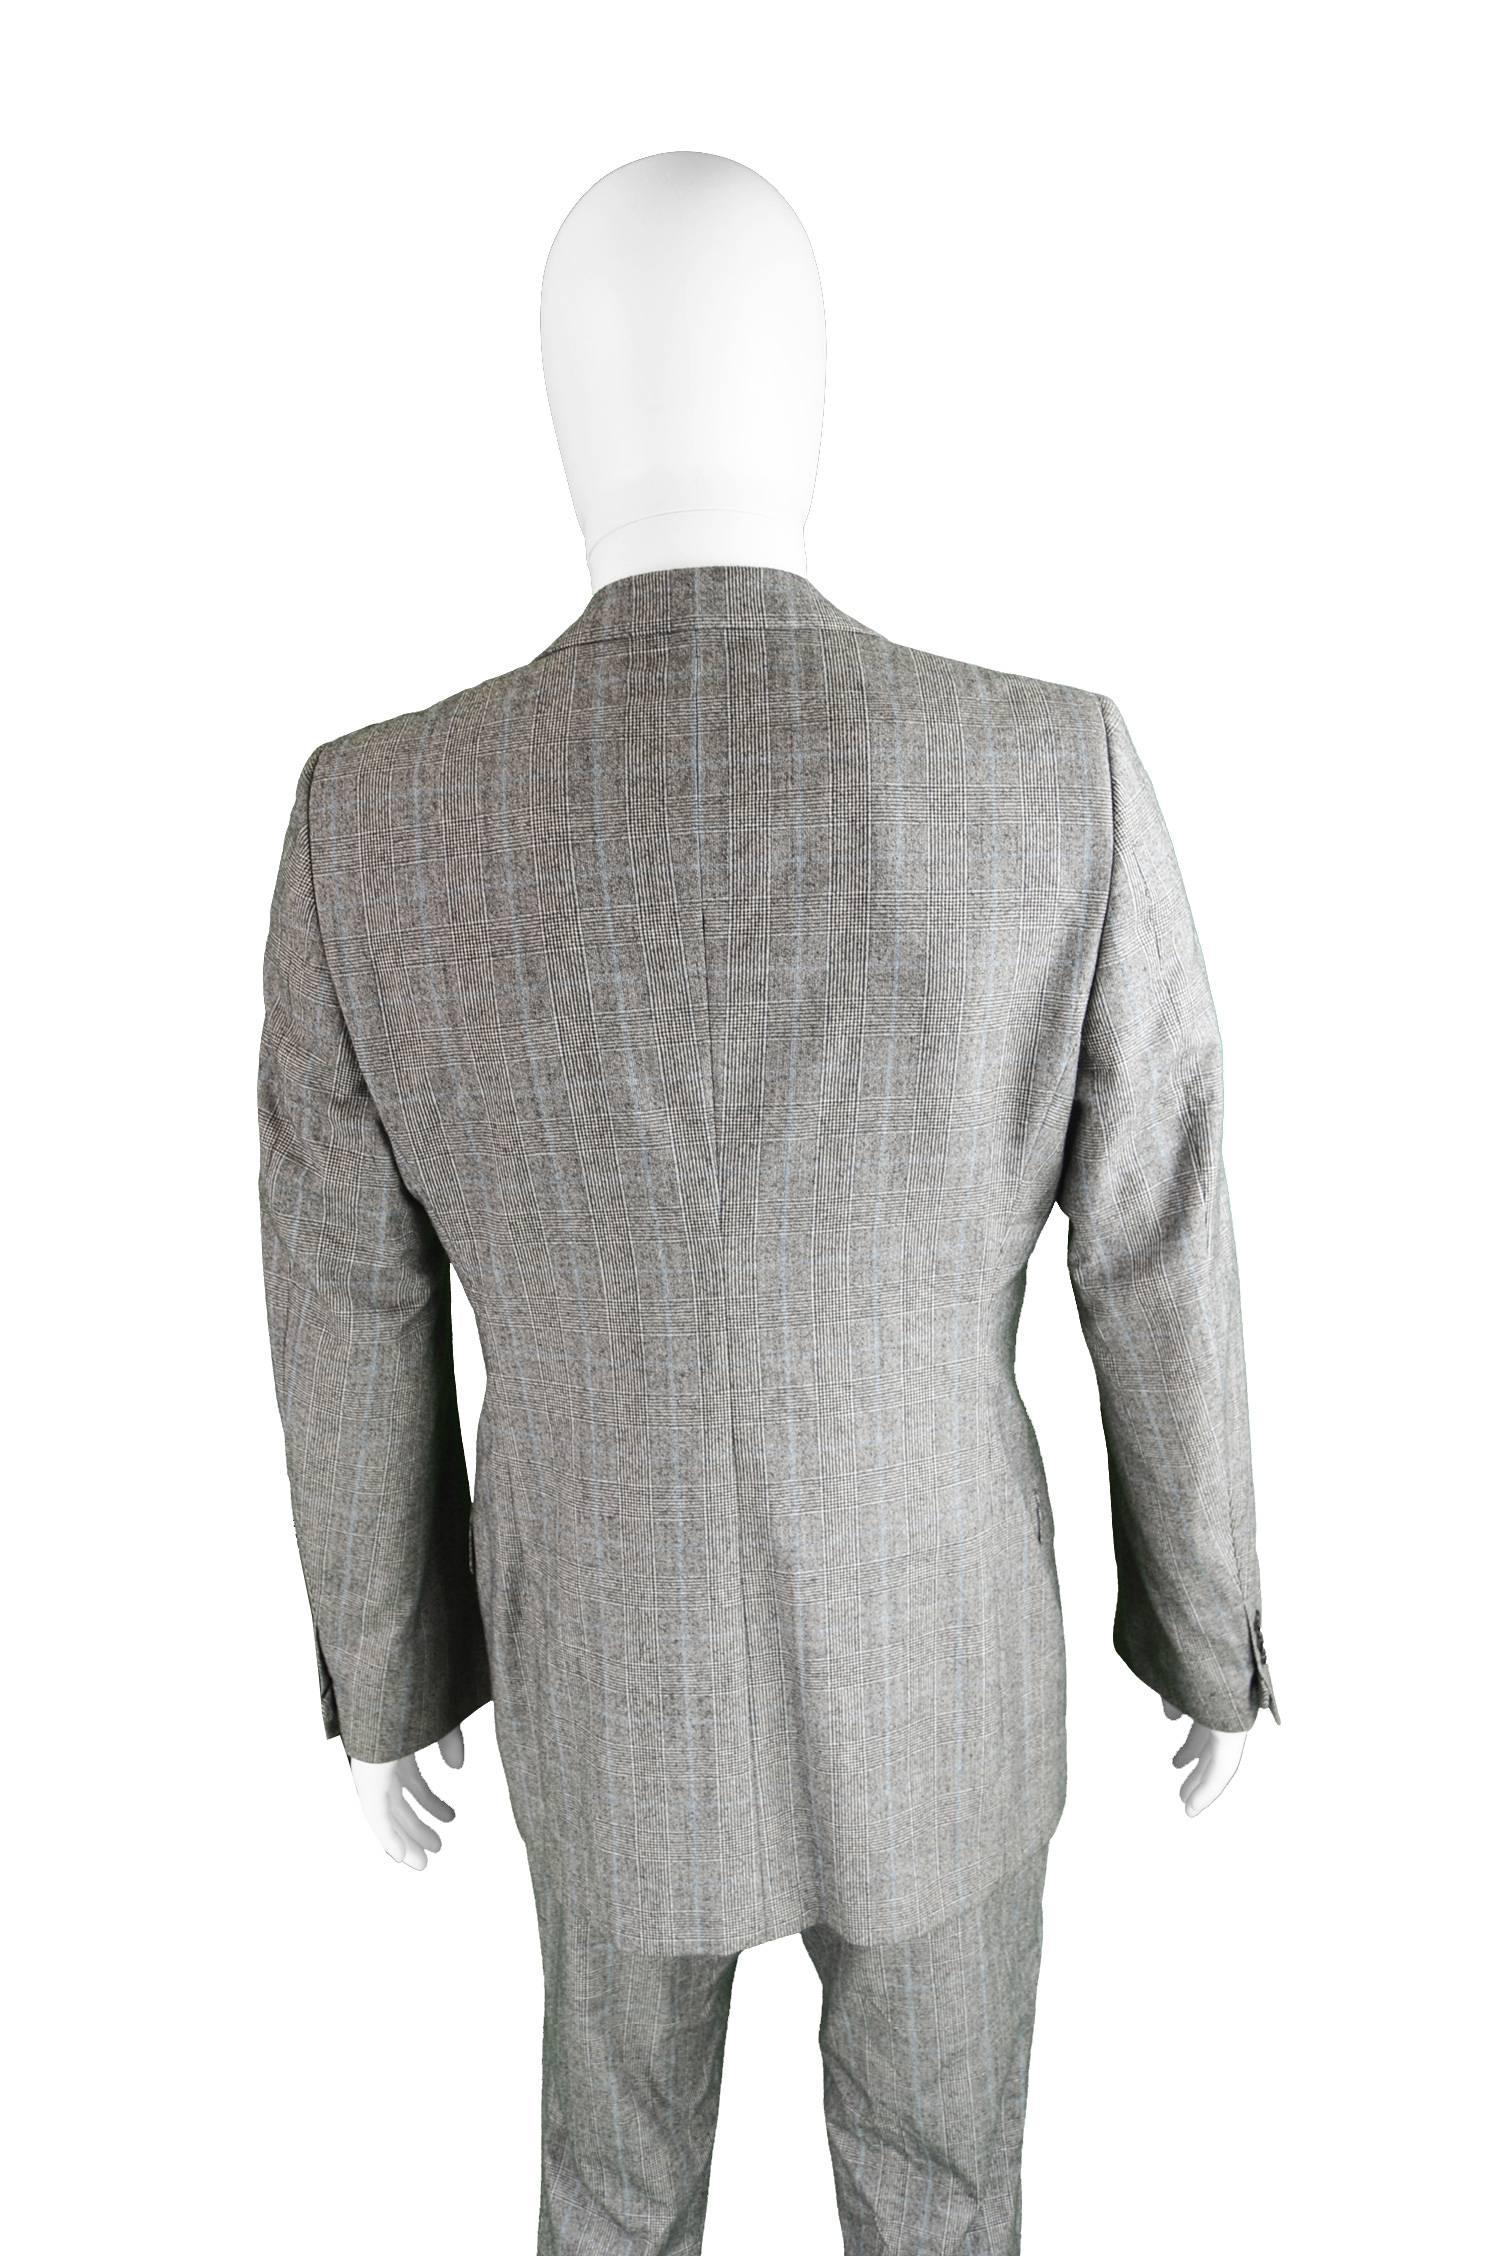 Yves Saint Laurent Men's Gray Wool Prince of Wales Check 2 Piece Suit 2